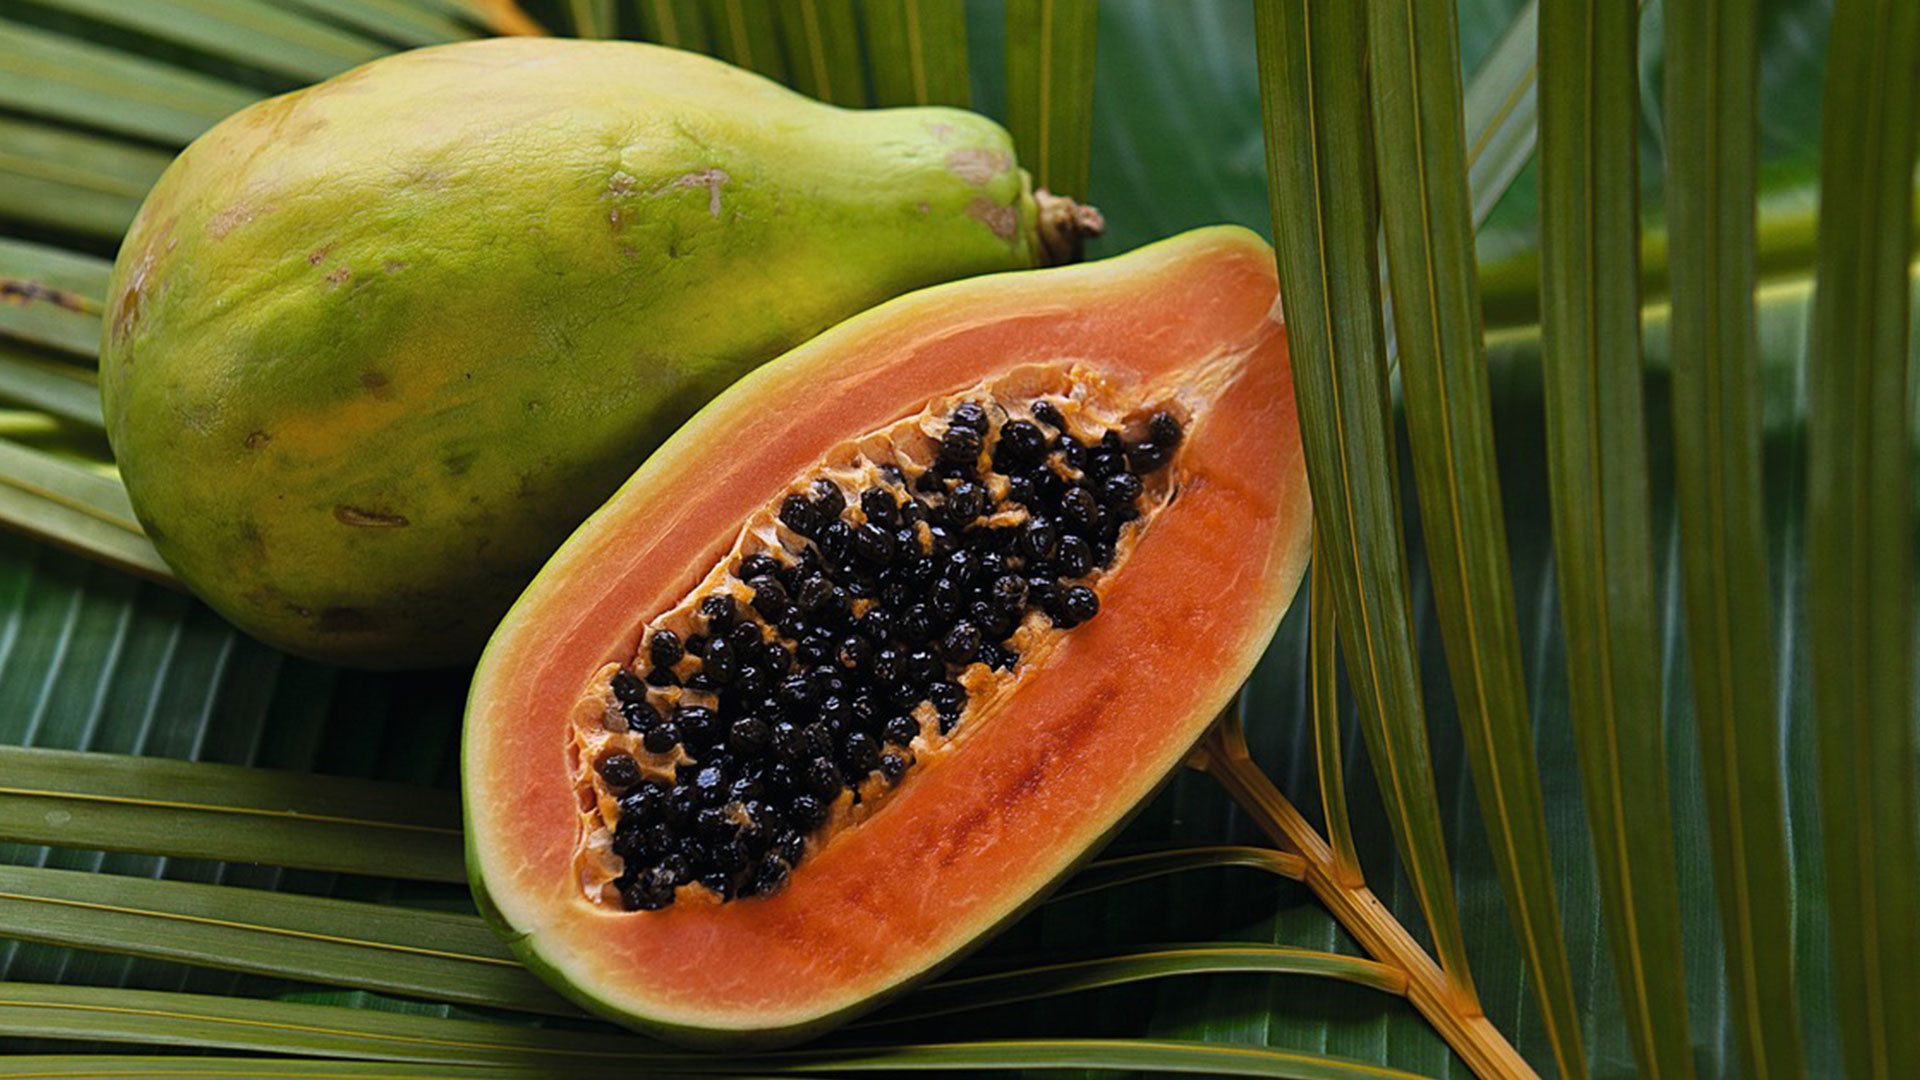 Papaya: Melon-like tropical fruit with an orange-colored sweet, soft flesh and edible seeds. 1920x1080 Full HD Wallpaper.